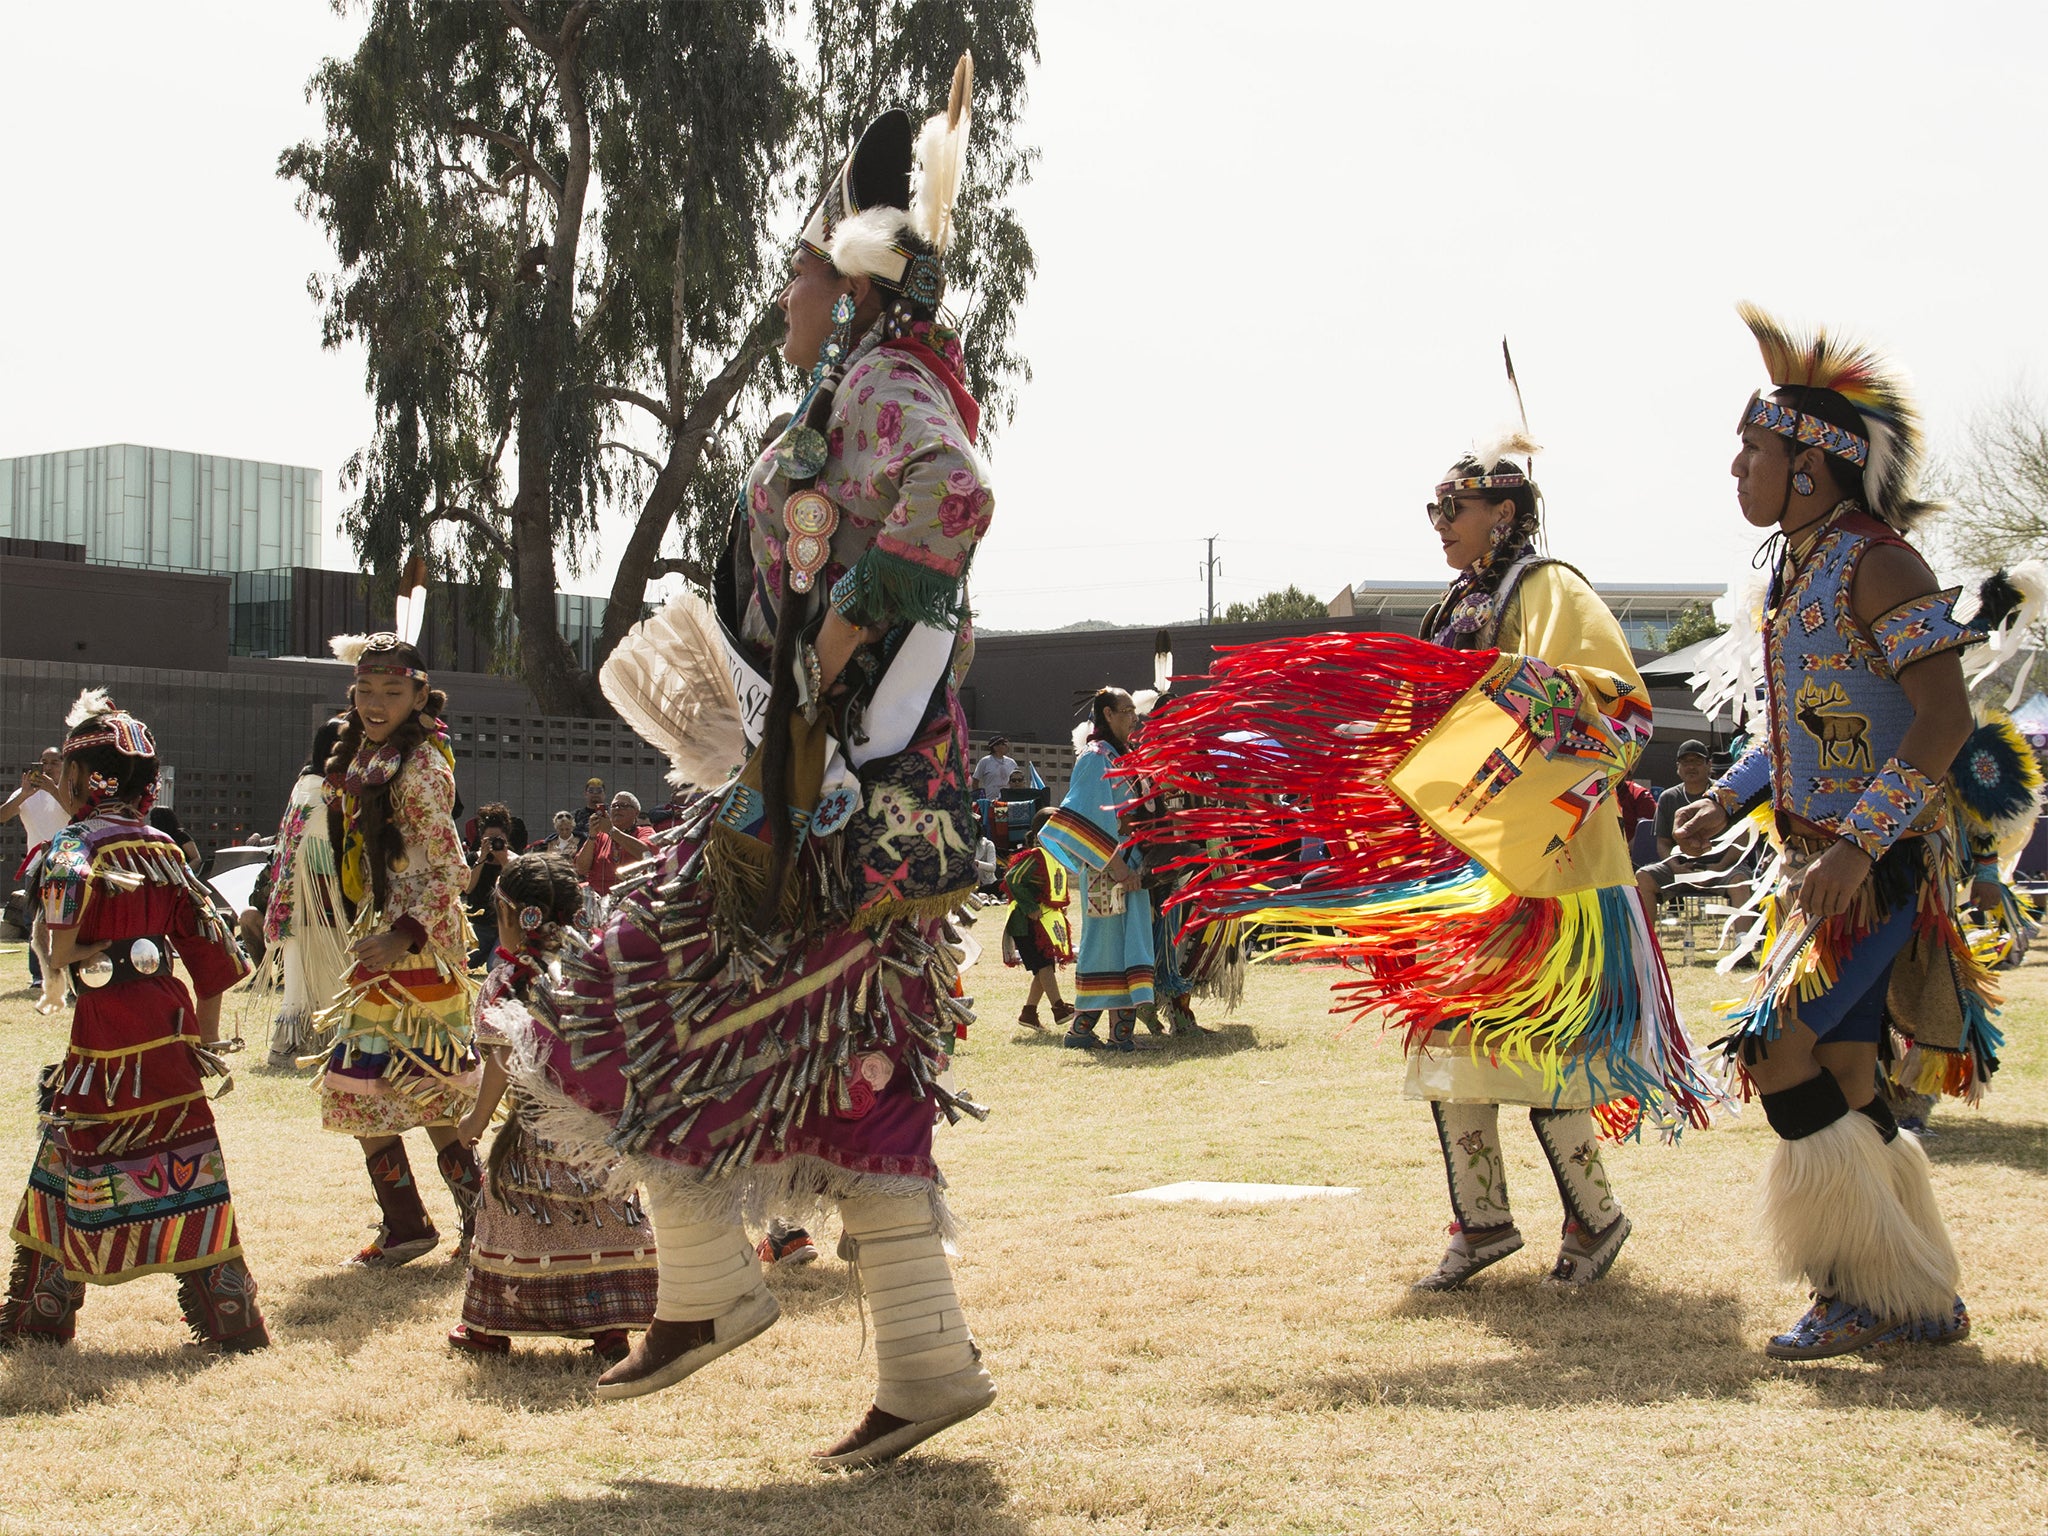 Dancers perform a Two-Spirit Powwow. Powwows are usually separated into male and female dances, but in honour of Two-Spirit, gender remains mixed